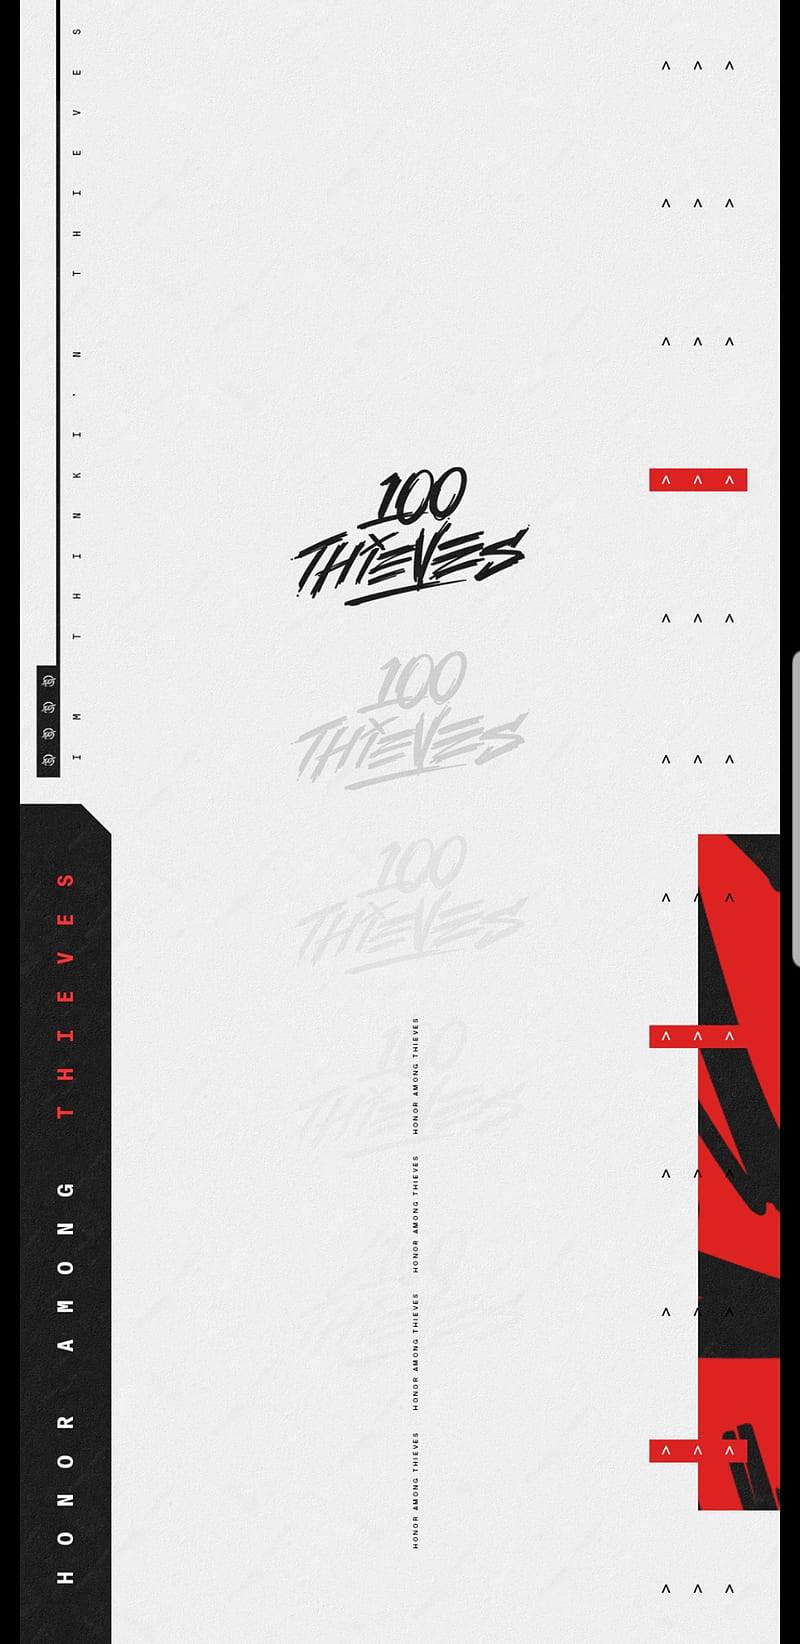 Share more than 61 100 thieves wallpaper latest - in.cdgdbentre